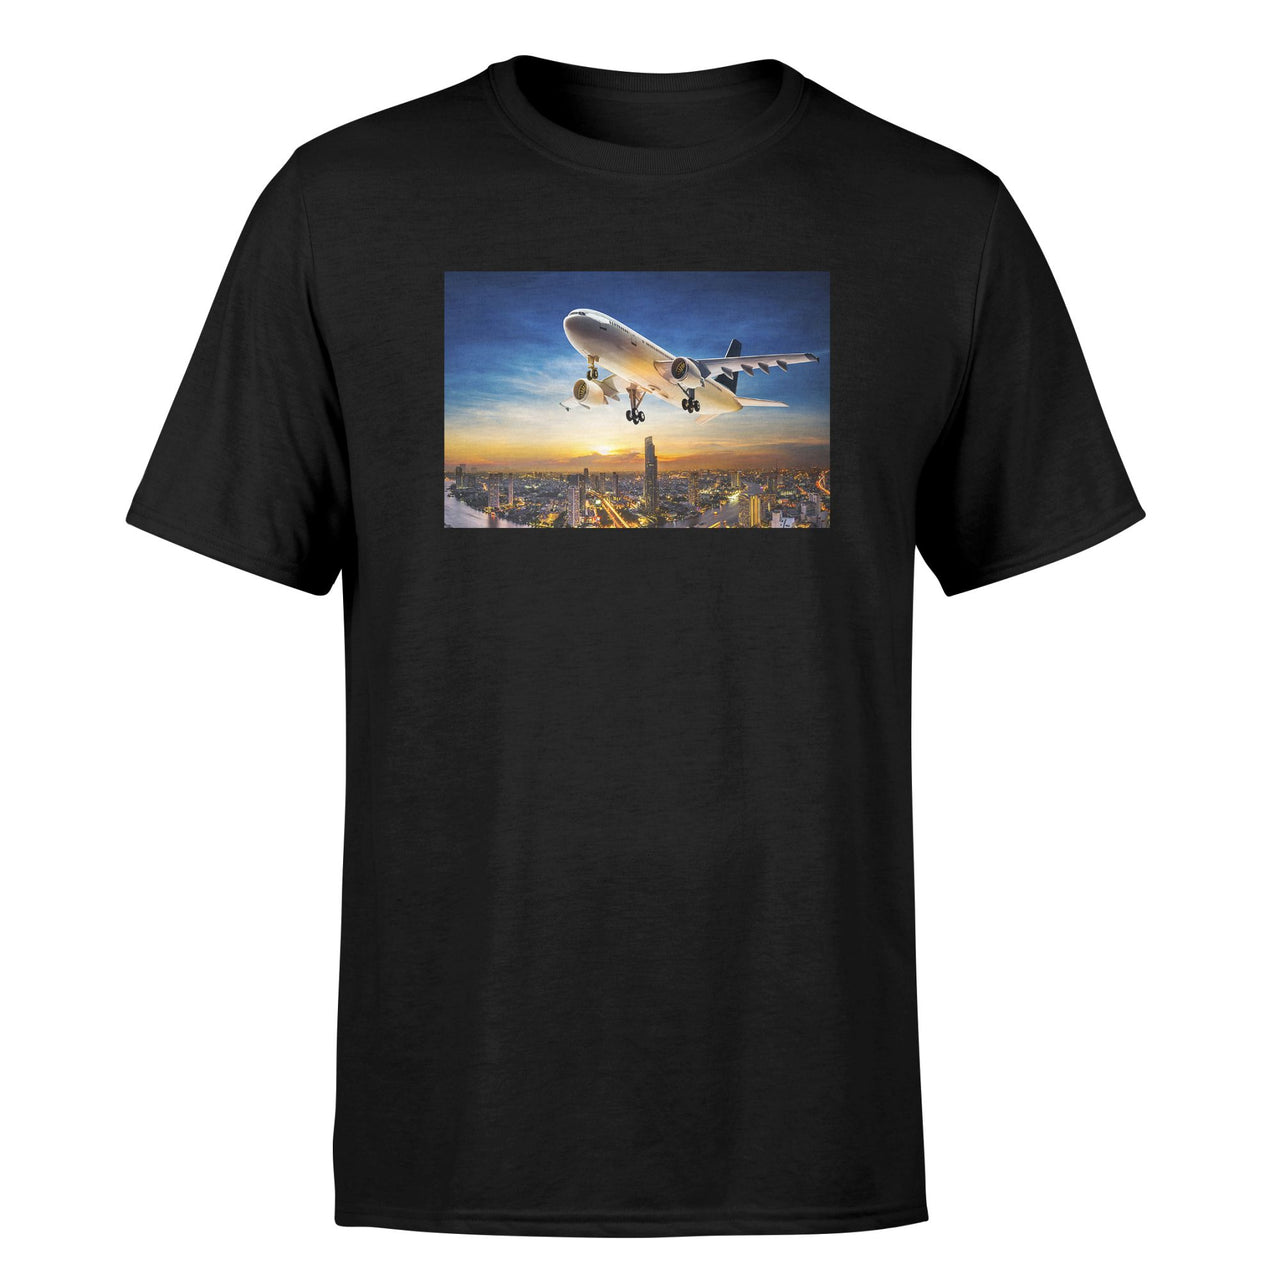 Super Aircraft over City at Sunset Designed T-Shirts